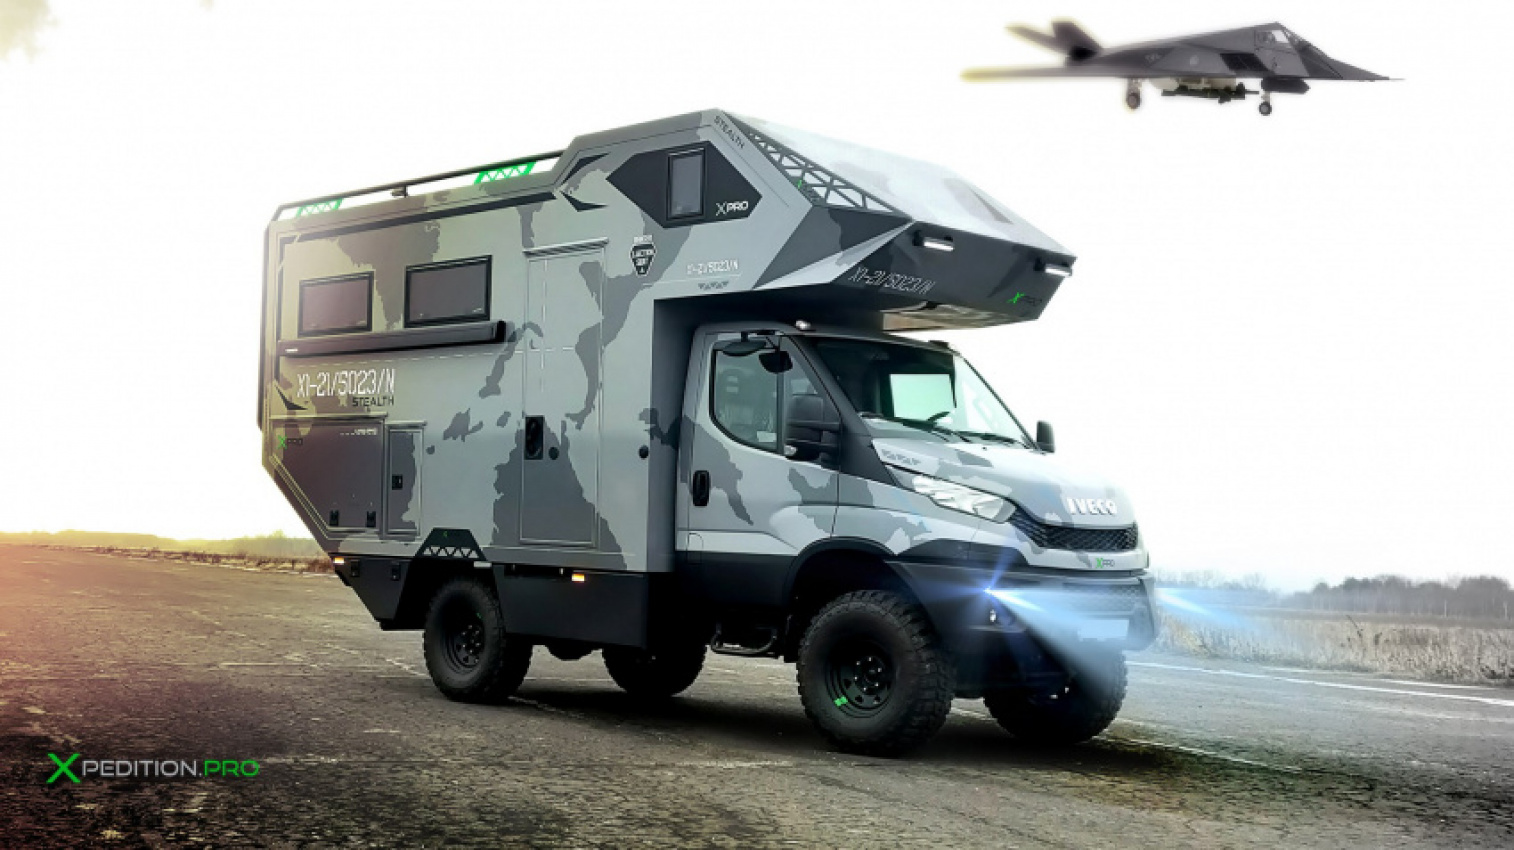 autos, cars, news, iveco, motorhome, video, the xpro one is a rugged rv inspired by fighter jets and tanks